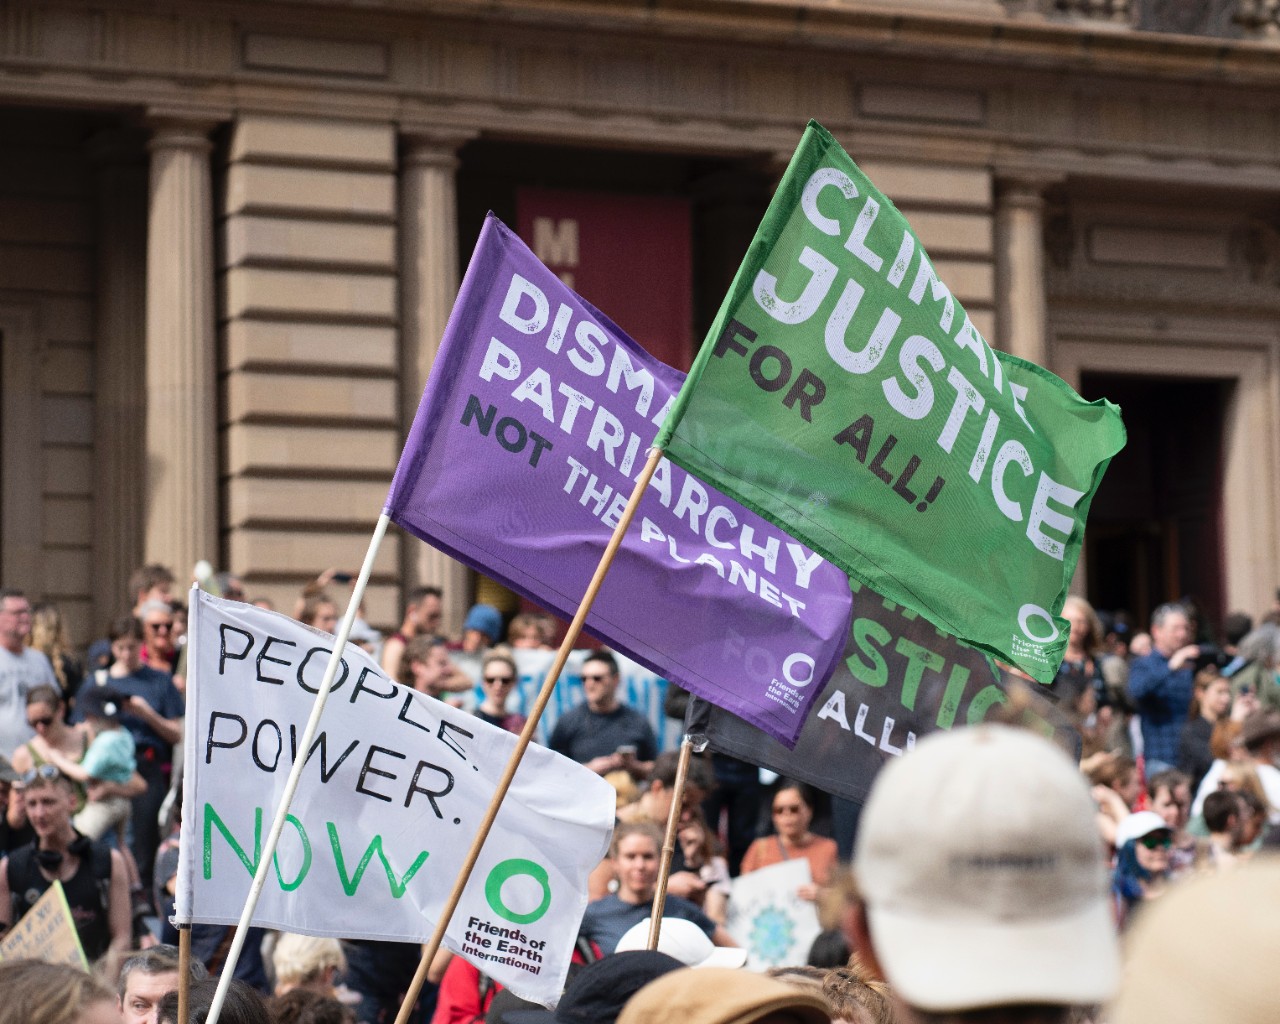 A climate protest in Melbourne. Credit: Lawrence Makoona